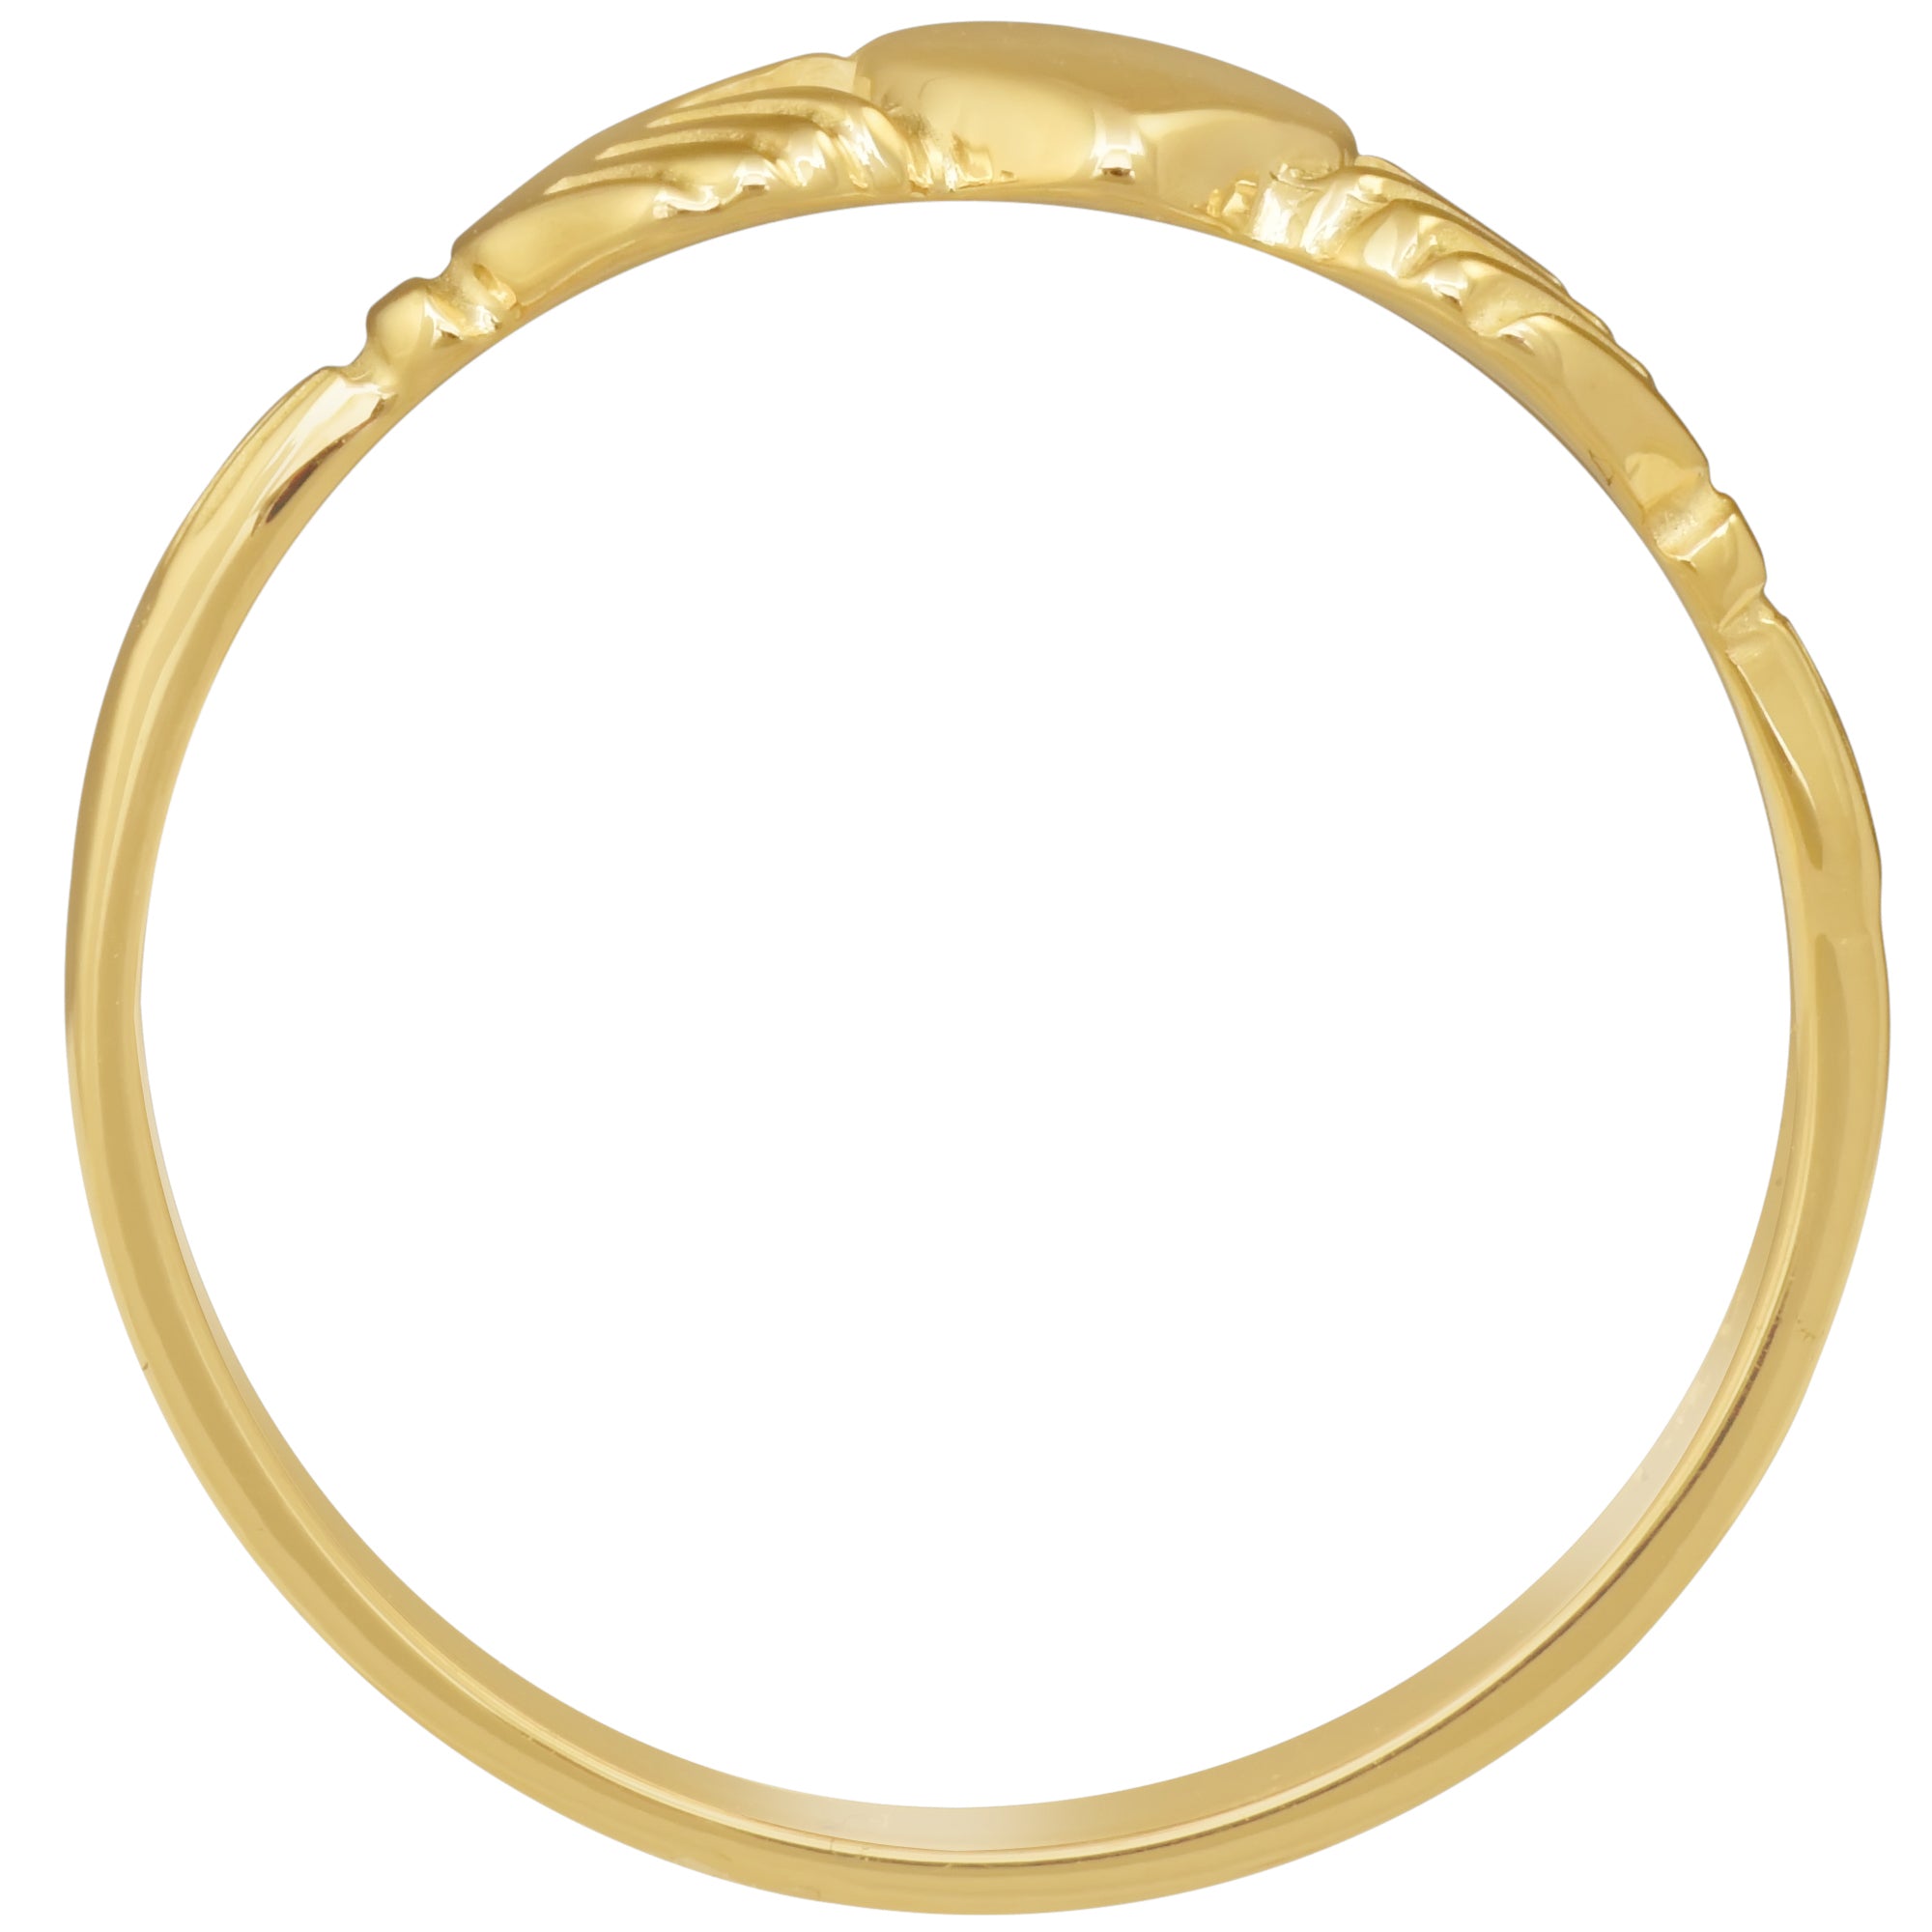 Polished Claddagh Ring in 14kt Yellow Gold